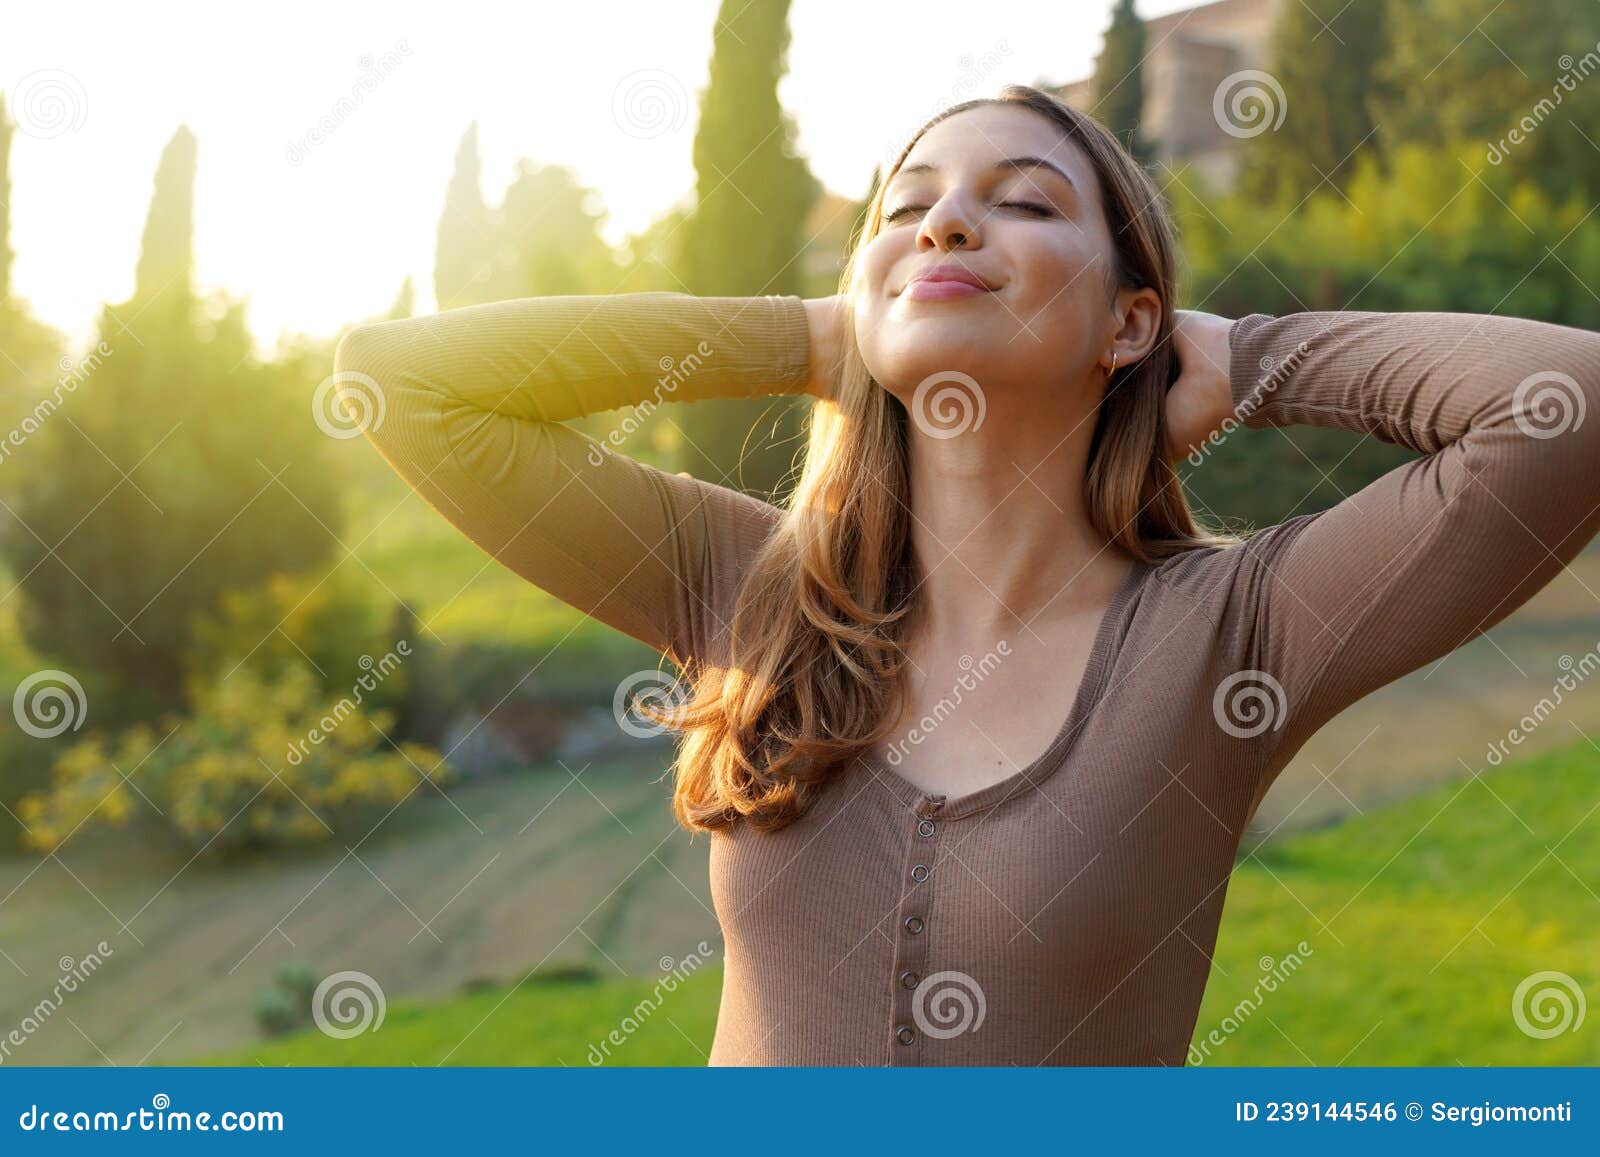 portrait of free woman breathing fresh air in nature. happy girl with hands behind her head in bliss. relaxing, quietness outdoor